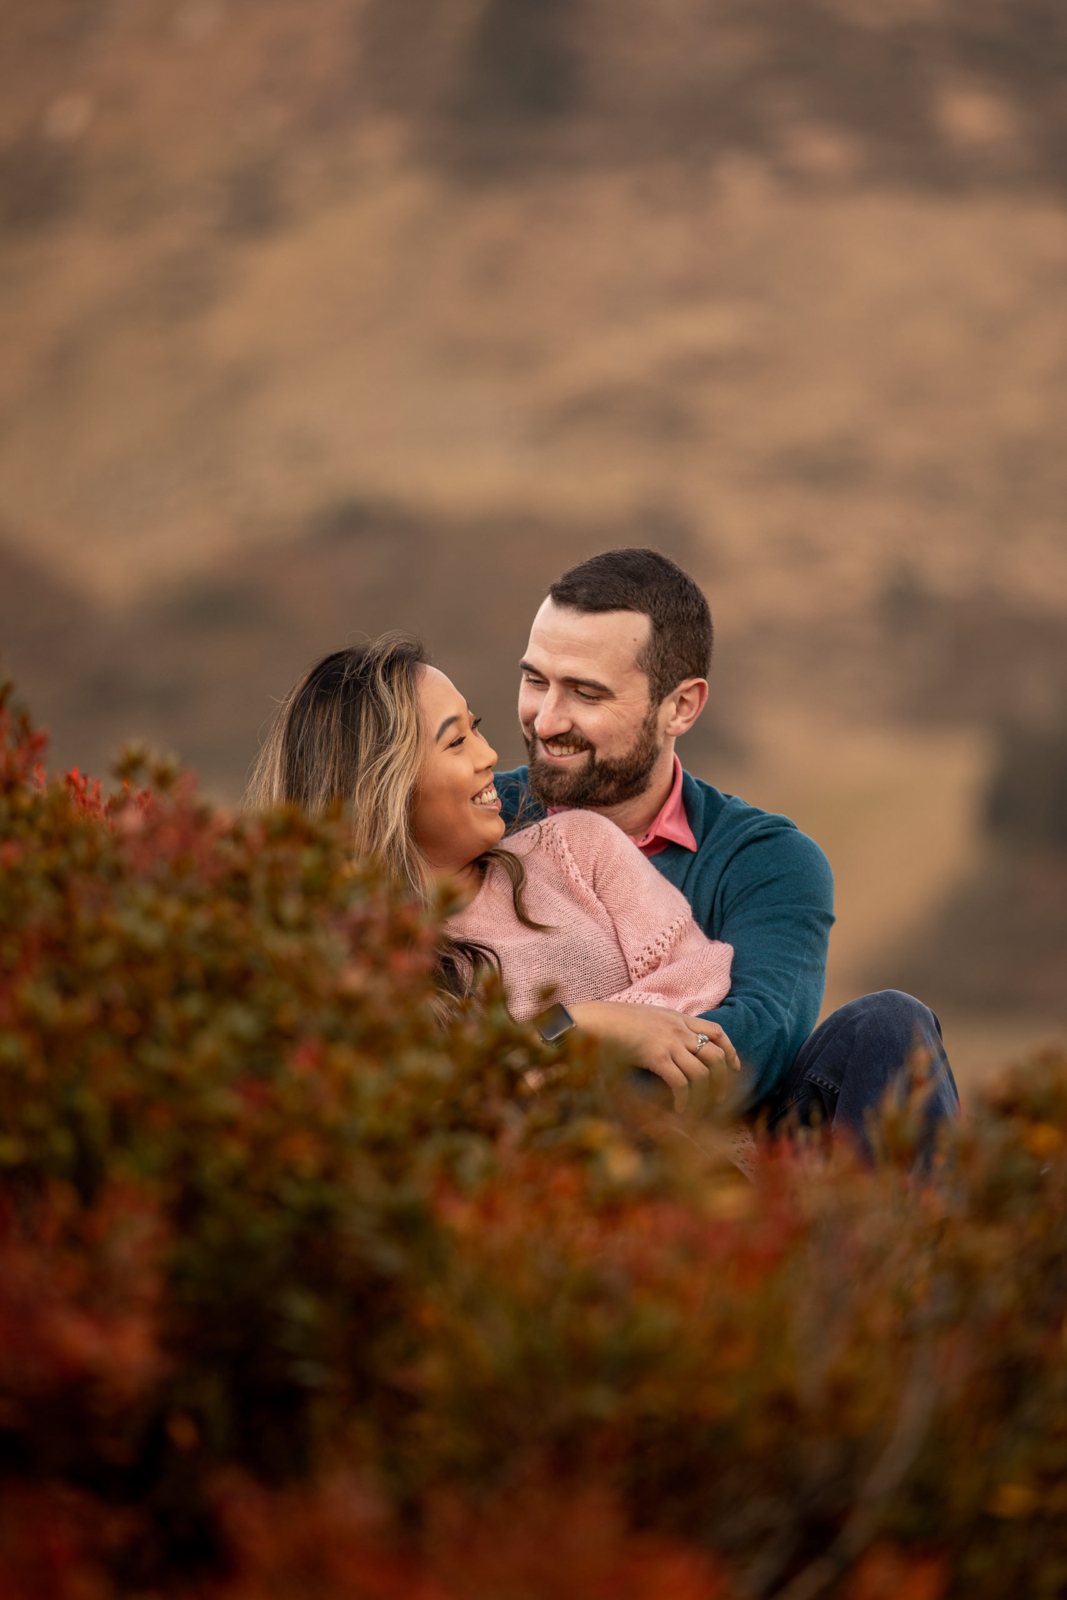 8 tipps for your engagement photos